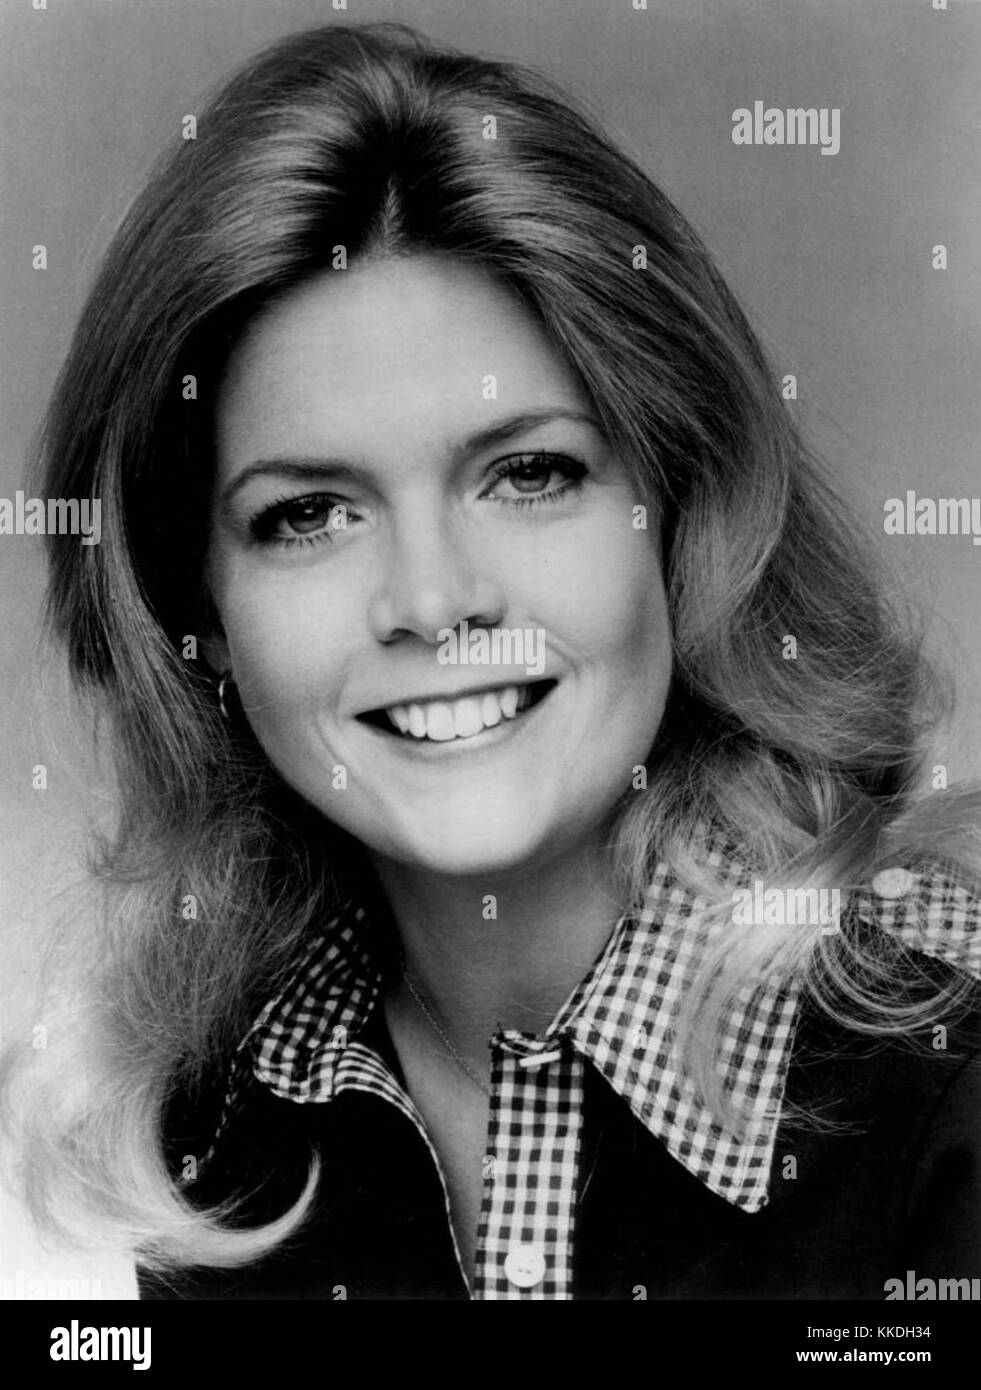 7/26/1977  Meredith Baxter - Birney stars actress as Nancy Douglas Maitland, divorcee and young mother of a two-year-old son who lives in her parents' home while she attends law school in 'Family,' ABC Television Network drama series which centers on the Lawrence, a close-knit American family living in Pasadena, Calif. The series will return for its second full season on Tuesday, Sept. 13 (10:00-11:00 p.m., EDT) on the ABC Television Network. Family Meredith Baxter-Birney 1977 Stock Photo